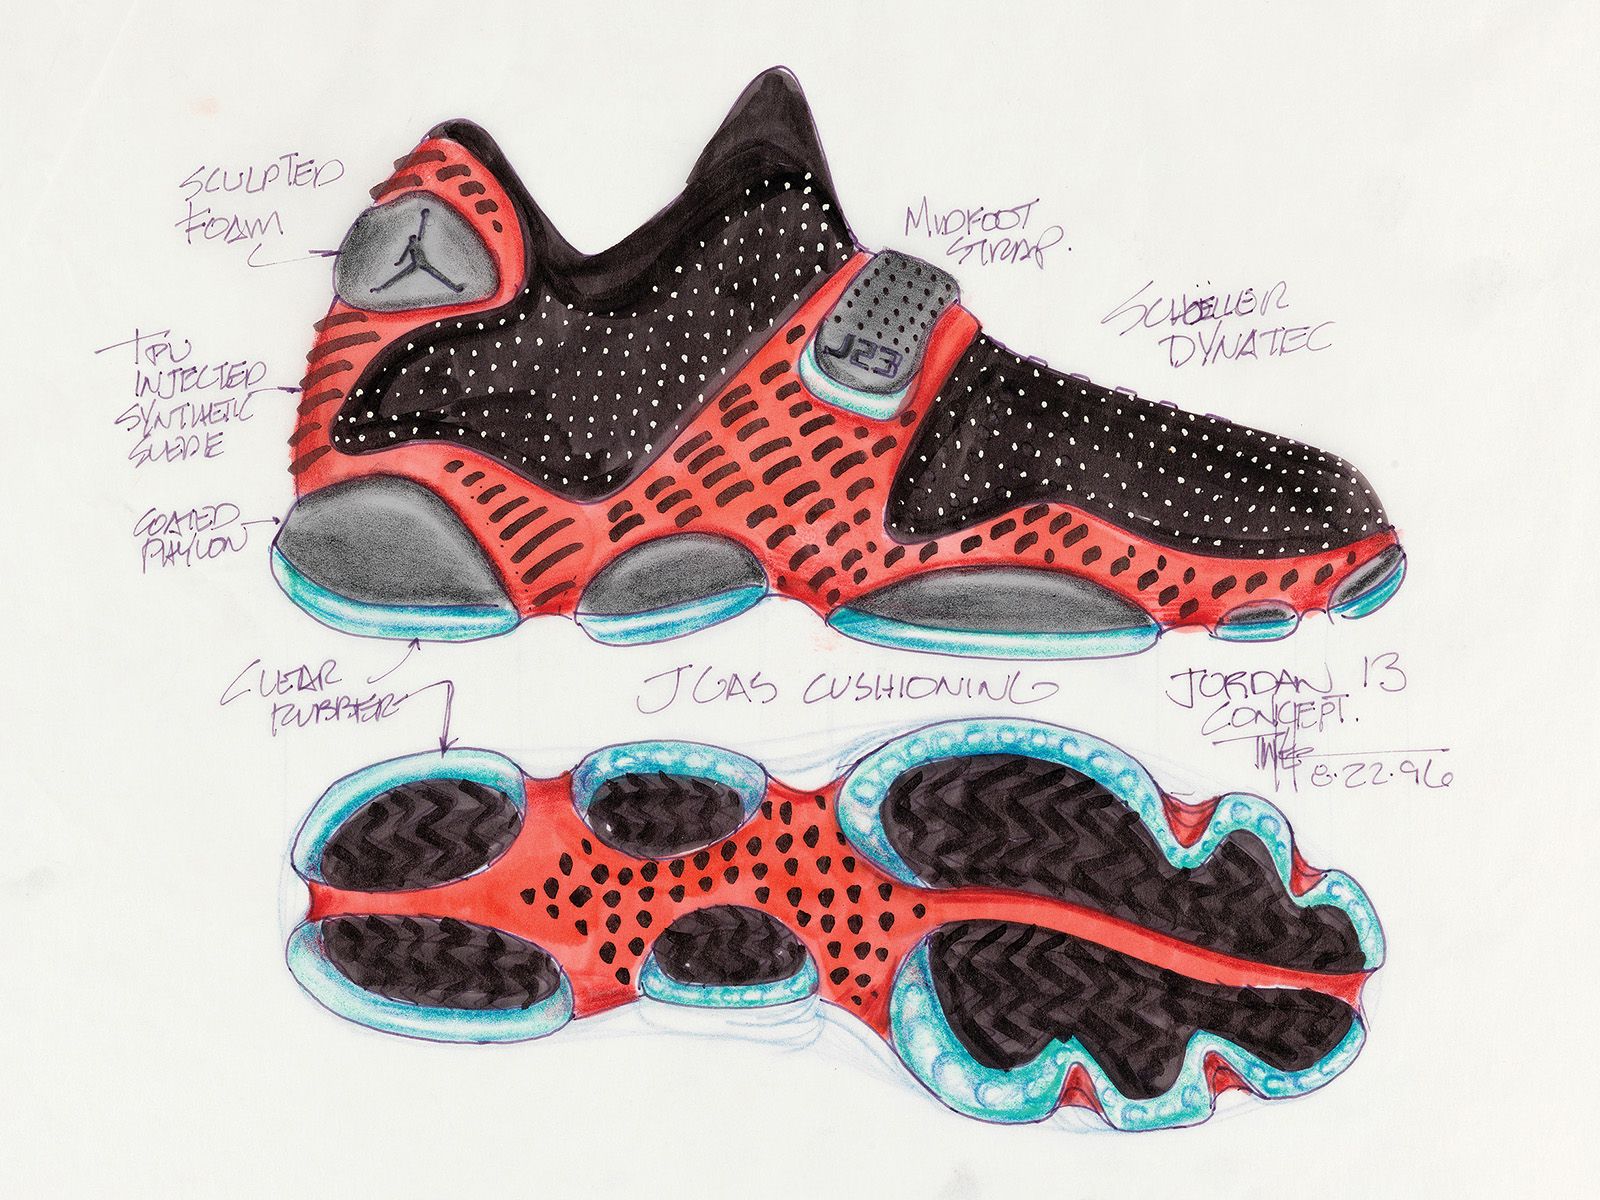 The History of the Air Jordan, At the Smithsonian